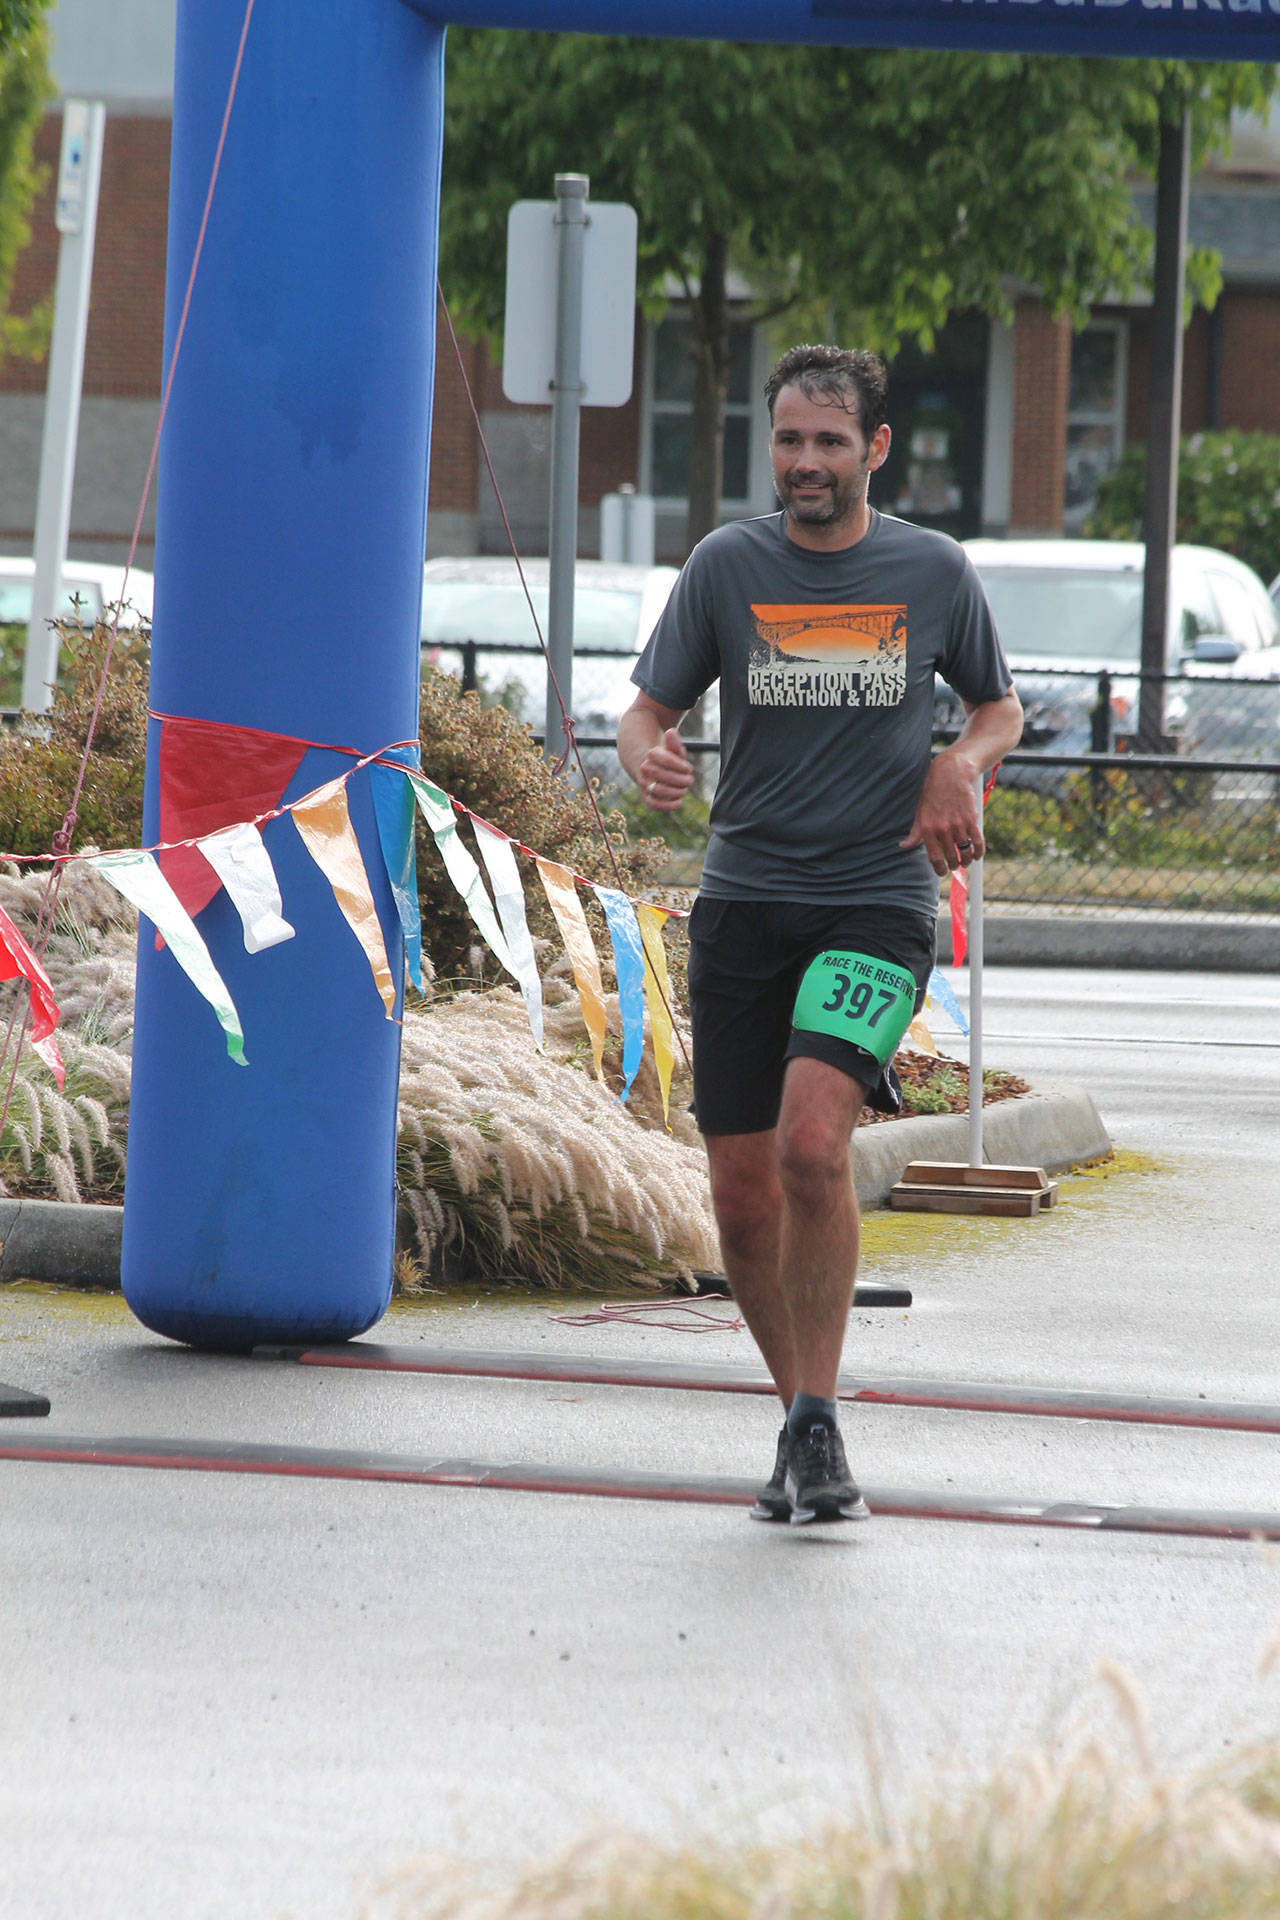 Coupeville’s James Steller crosses the finish line of the half marathon during the running of the Race the Reserve Saturday. (Photo by Jim Waller/Whidbey News-Times)